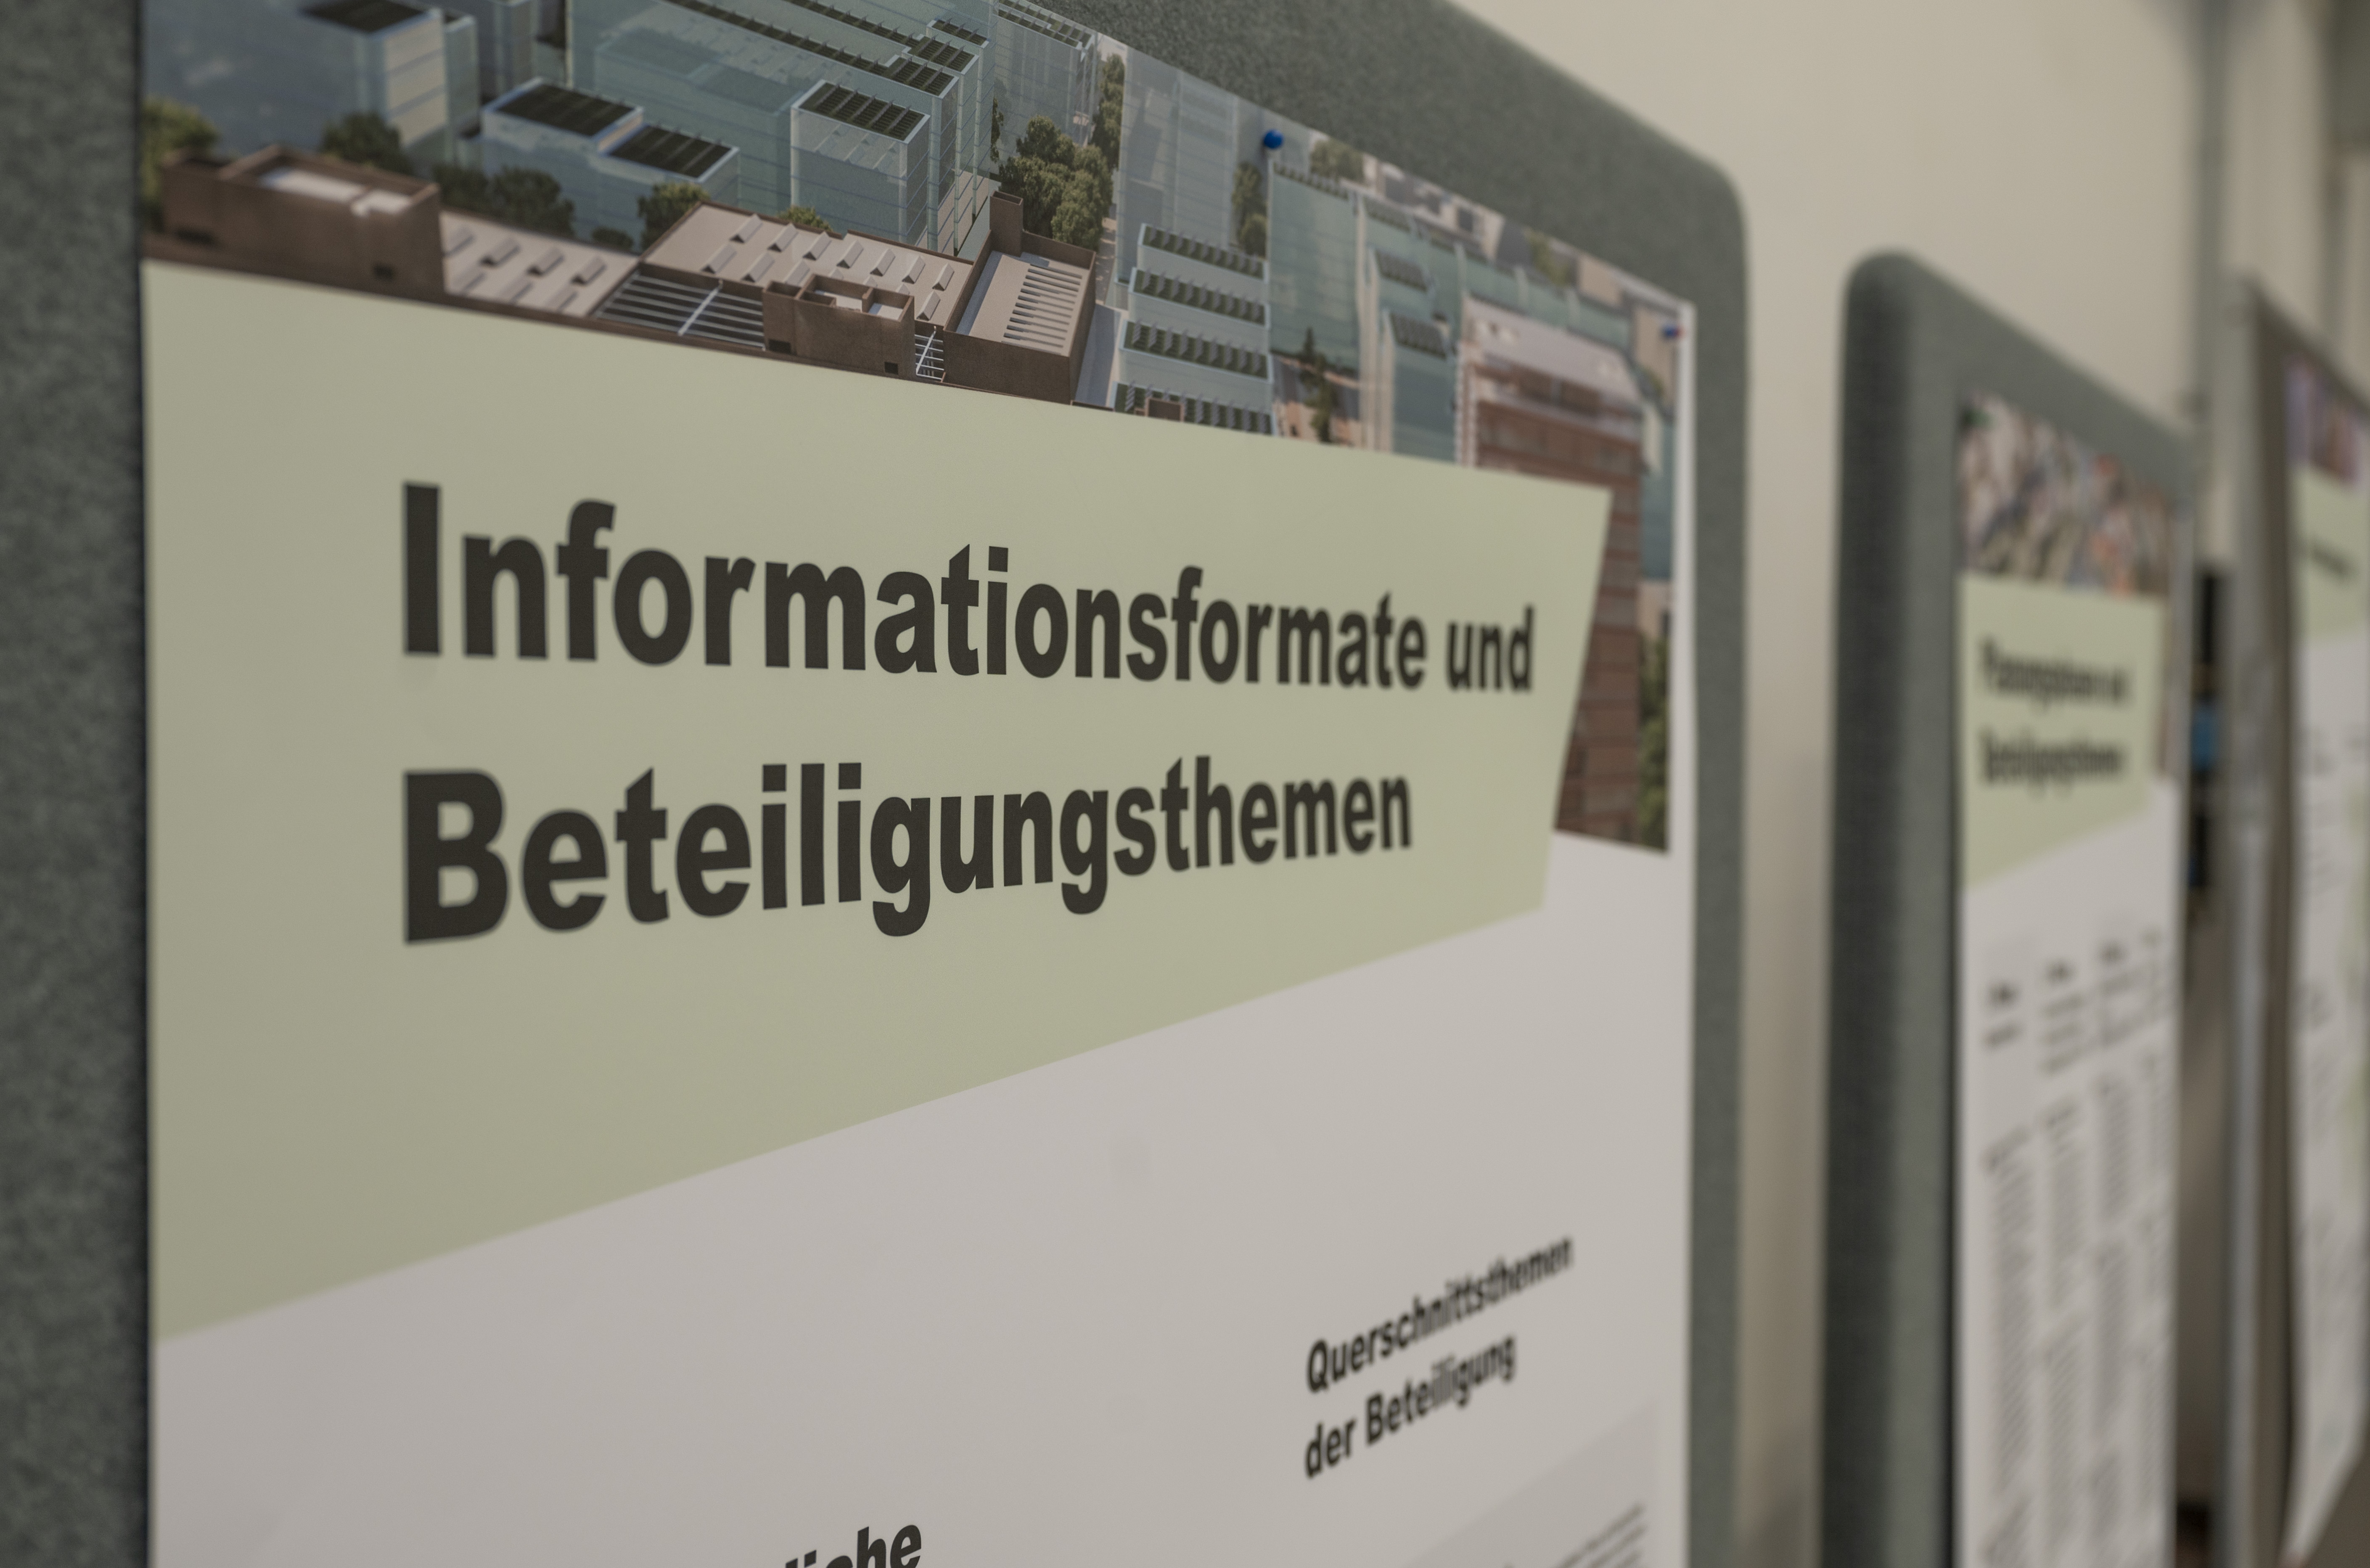  Siemensstadt Square information and participation formats